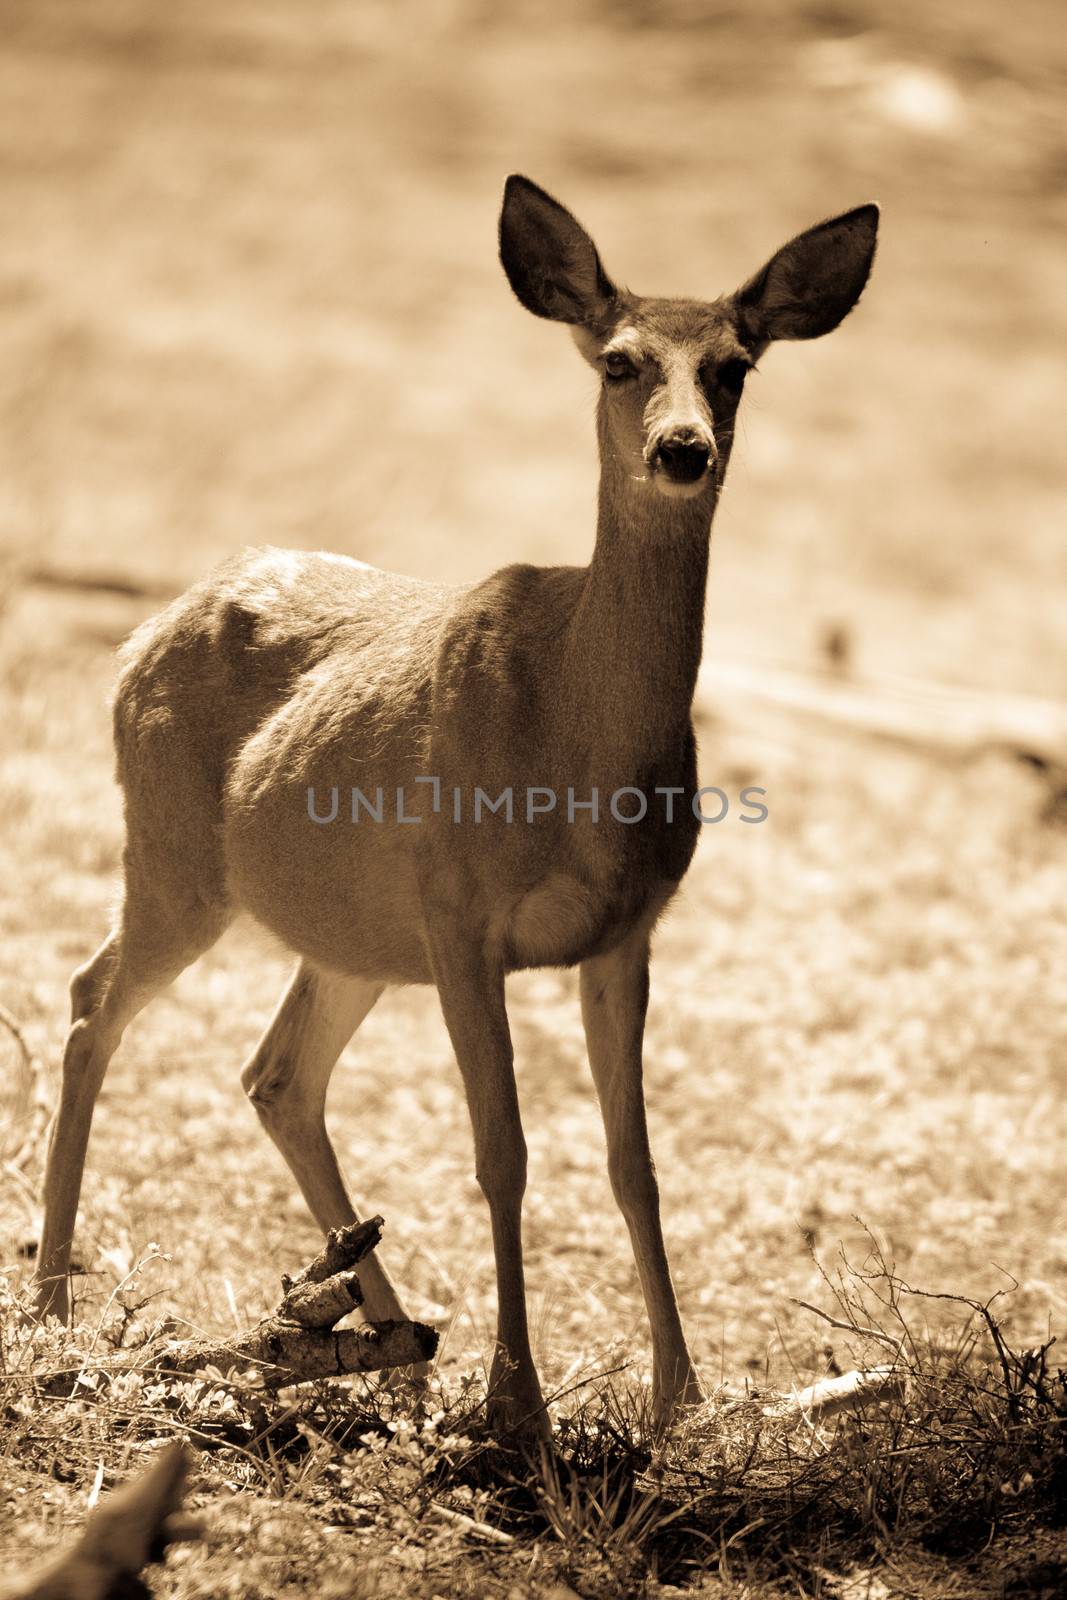 A cautious young black-tailed deer in the Yosemite National Park.